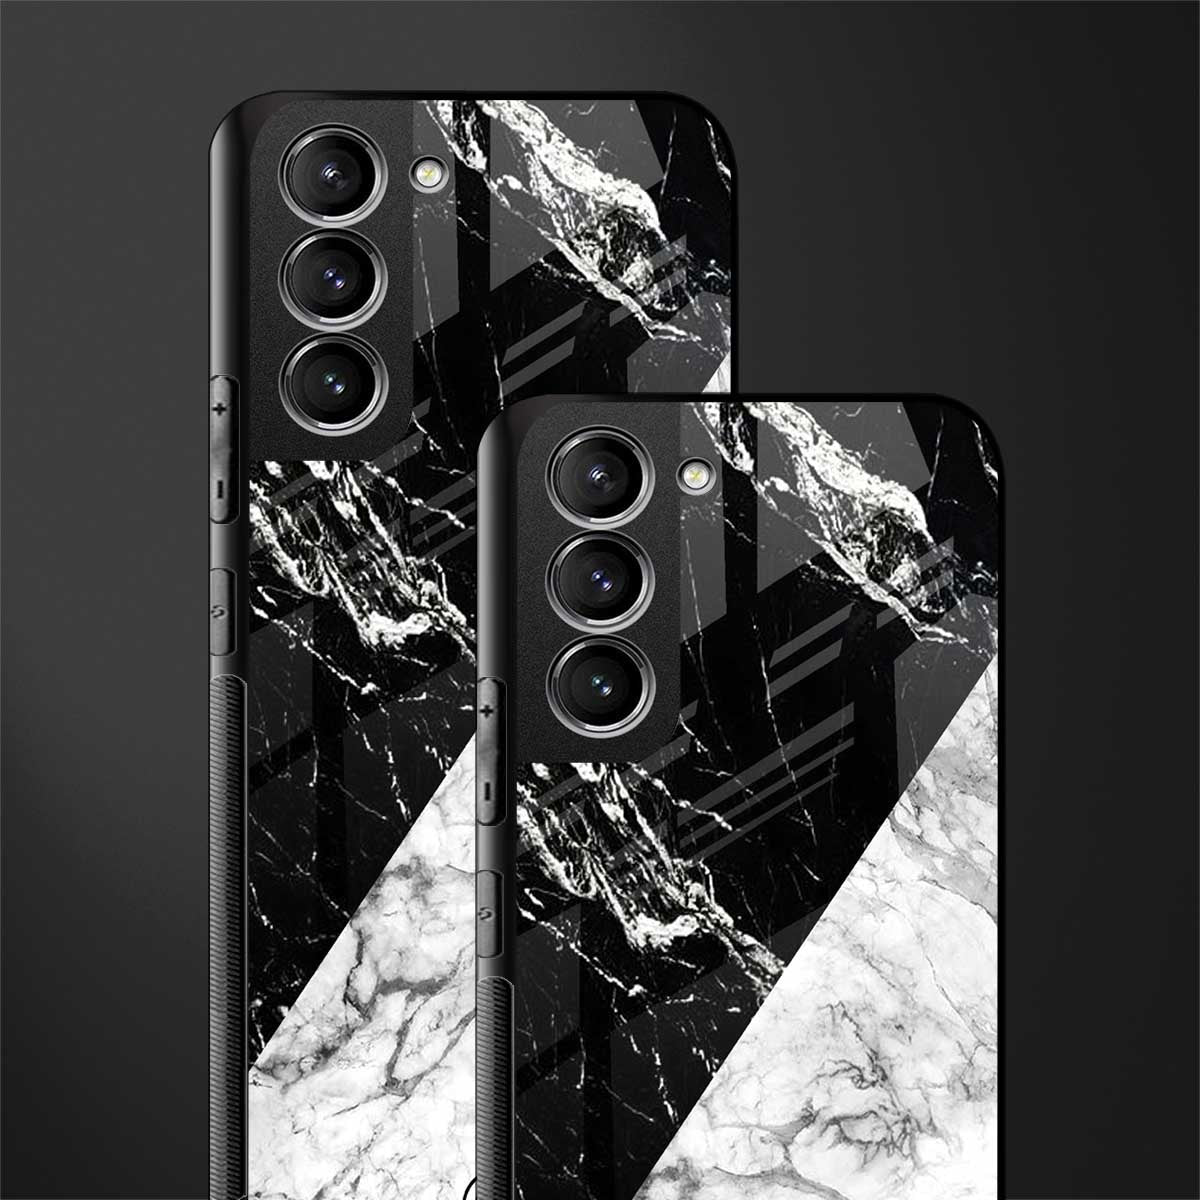 fatal contradiction phone cover for samsung galaxy s21 plus